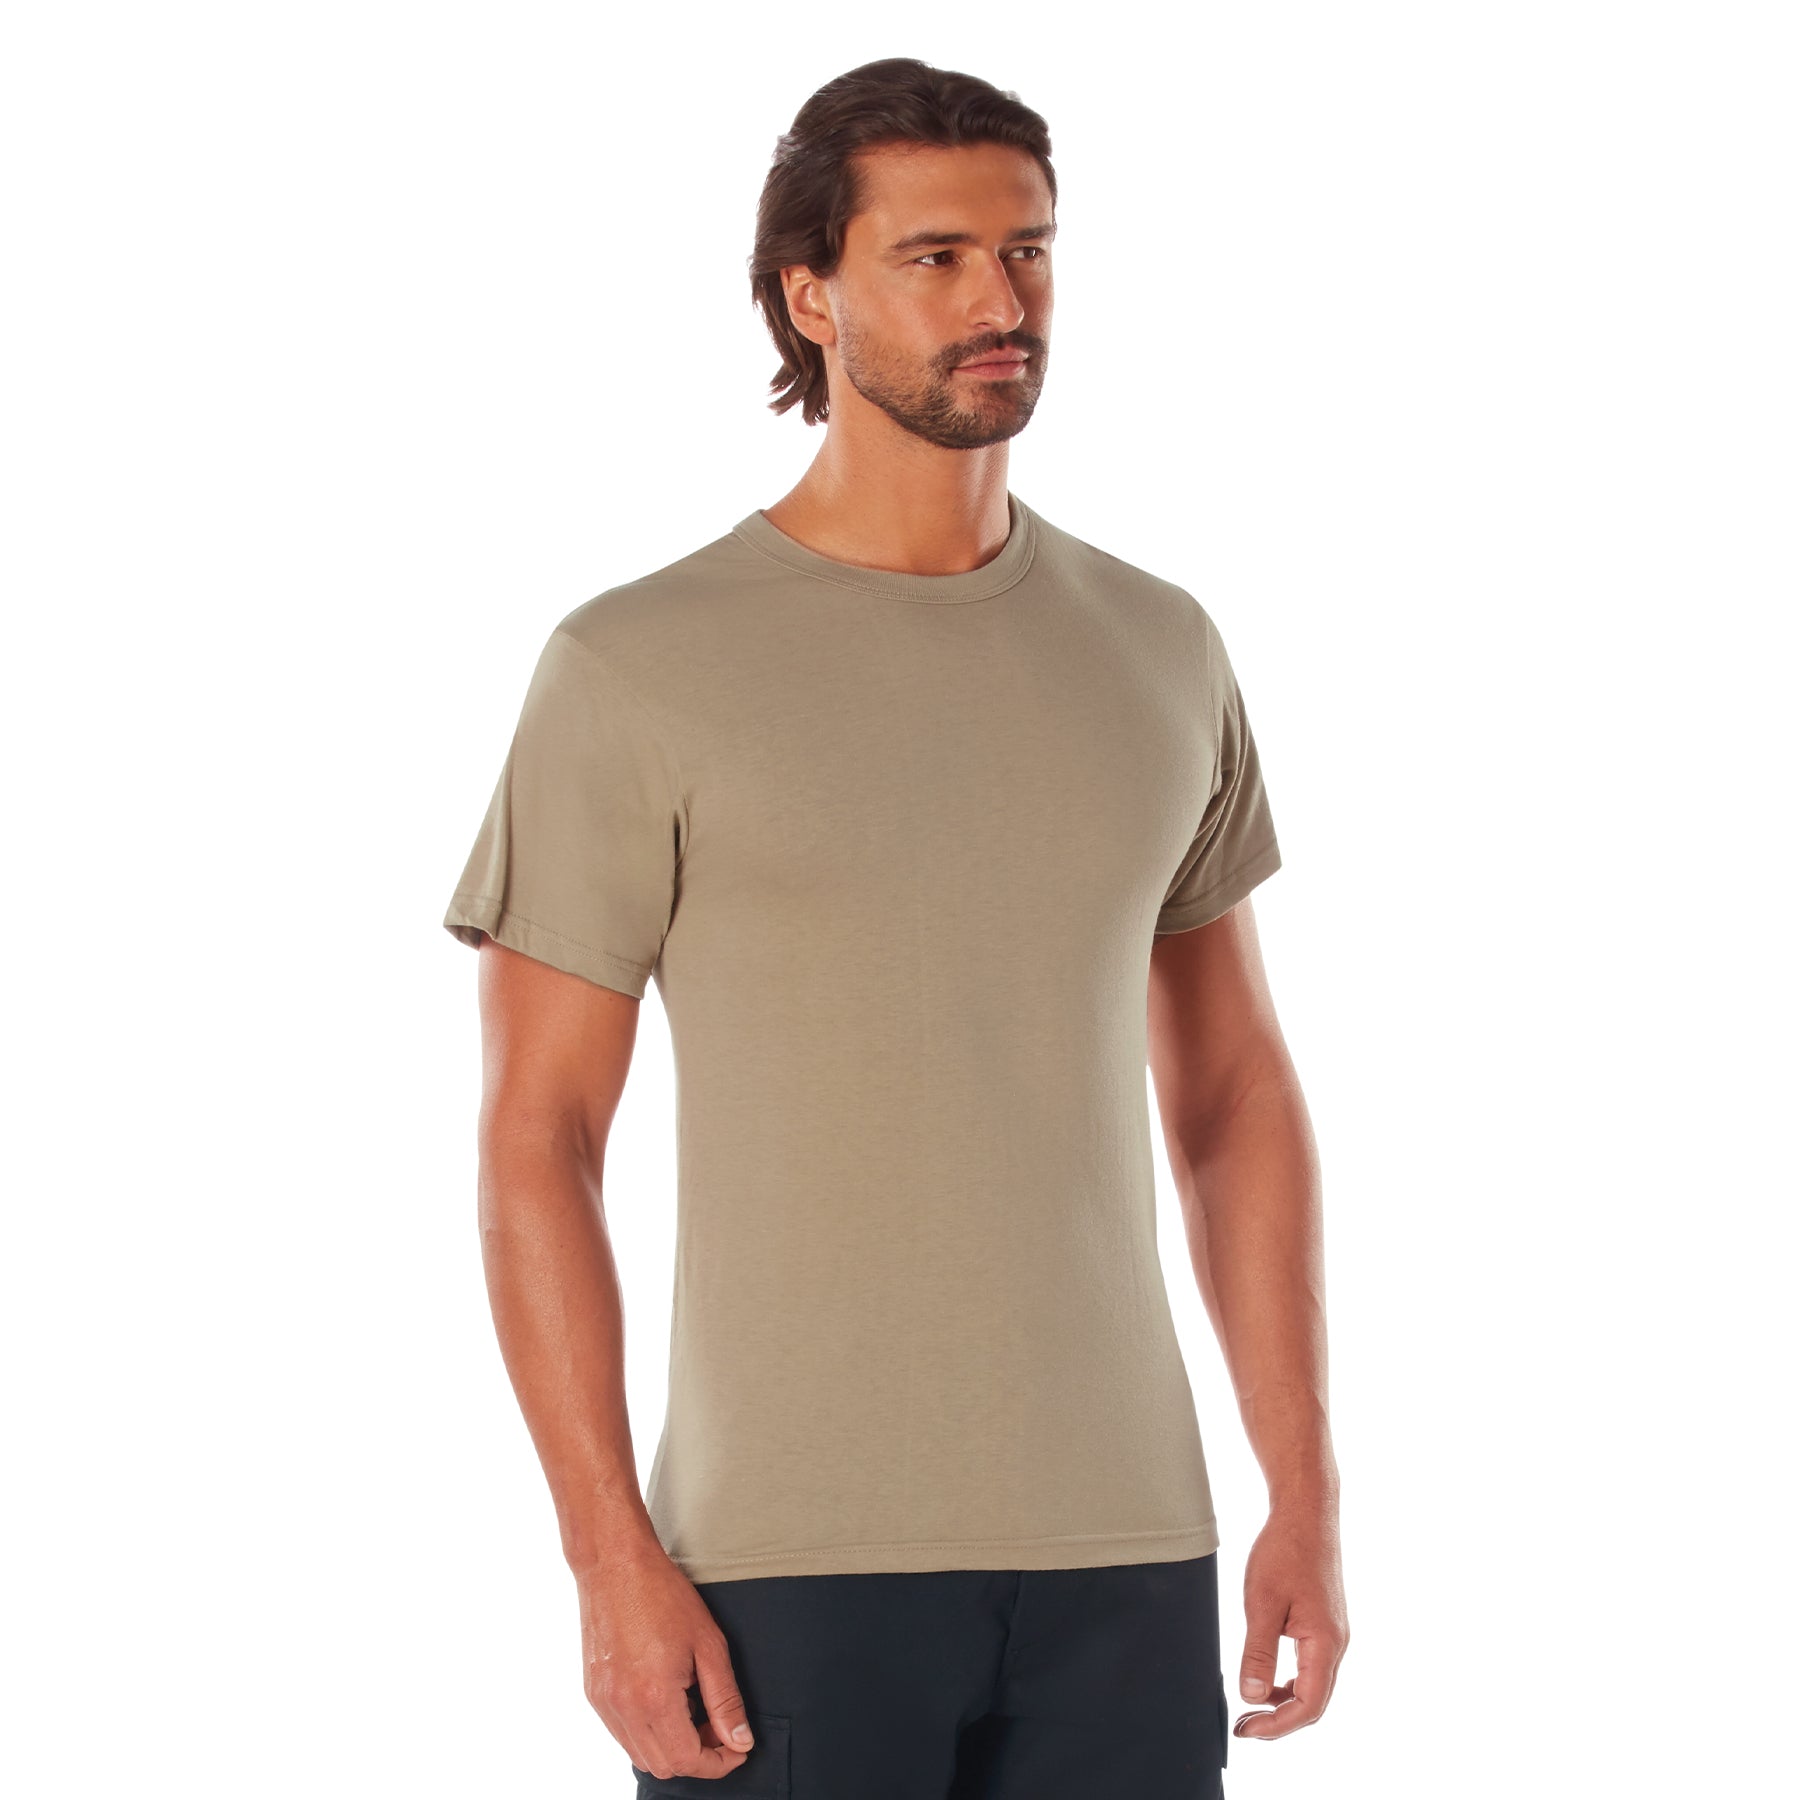 [AR 670-1][Military] Poly/Cotton T-Shirts